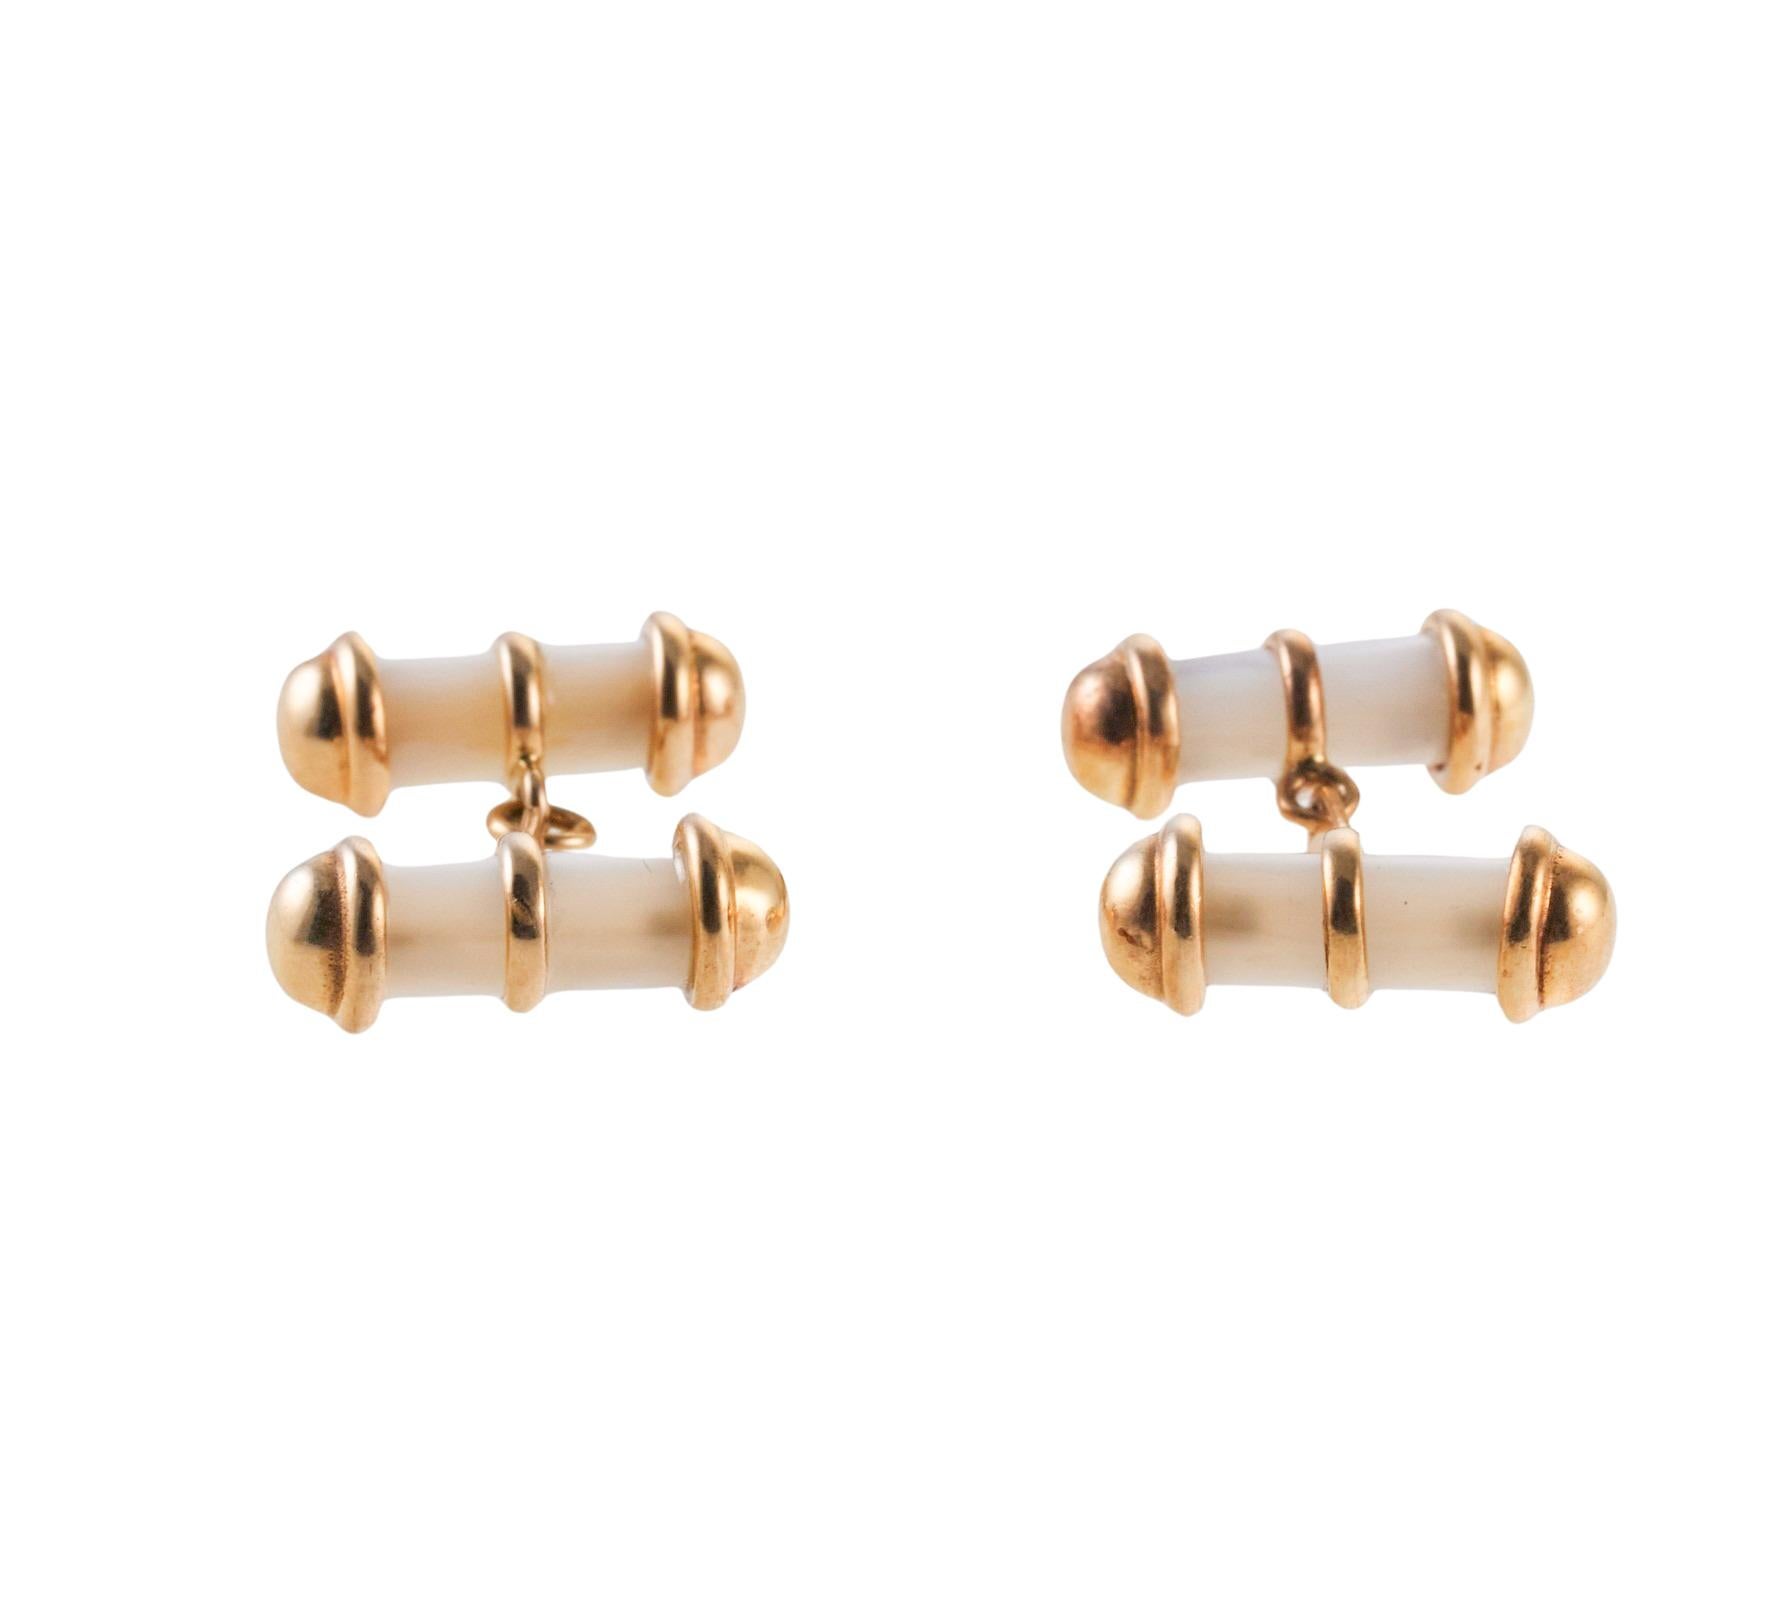 Pair of 18k gold Italian made cufflinks, with mother of pearl center. Each bar top measures 20mm x 7mm. Marked with Italian mark and 750. Weight of the pair - 14.4 grams. 